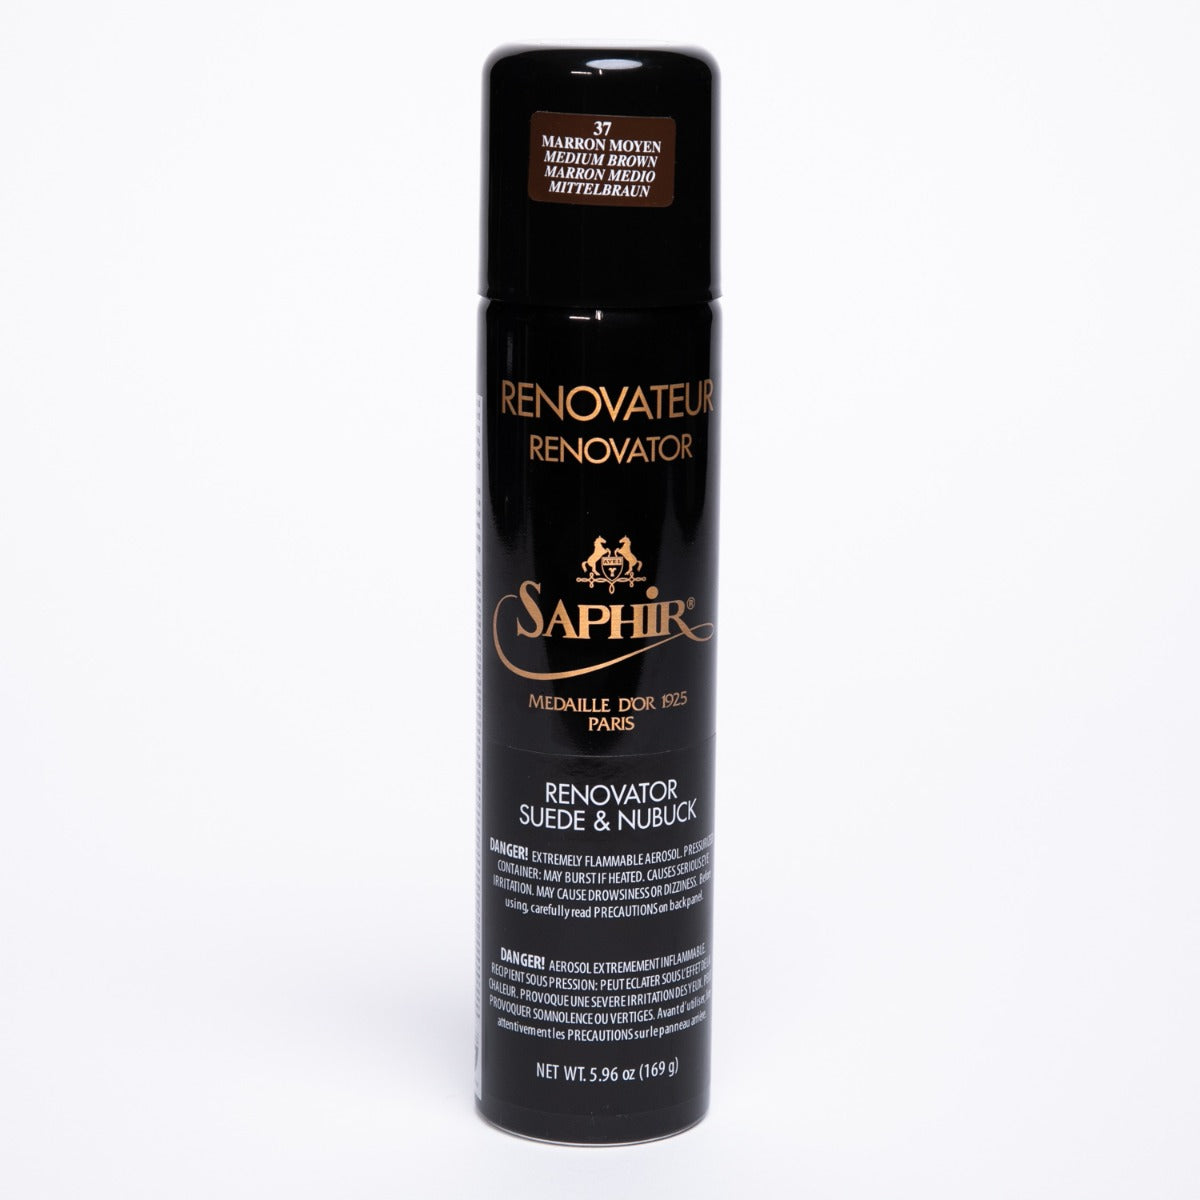 A bottle of Saphir Renovateur Suede & Nubuck Conditioning Spray by KirbyAllison.com on a white background.